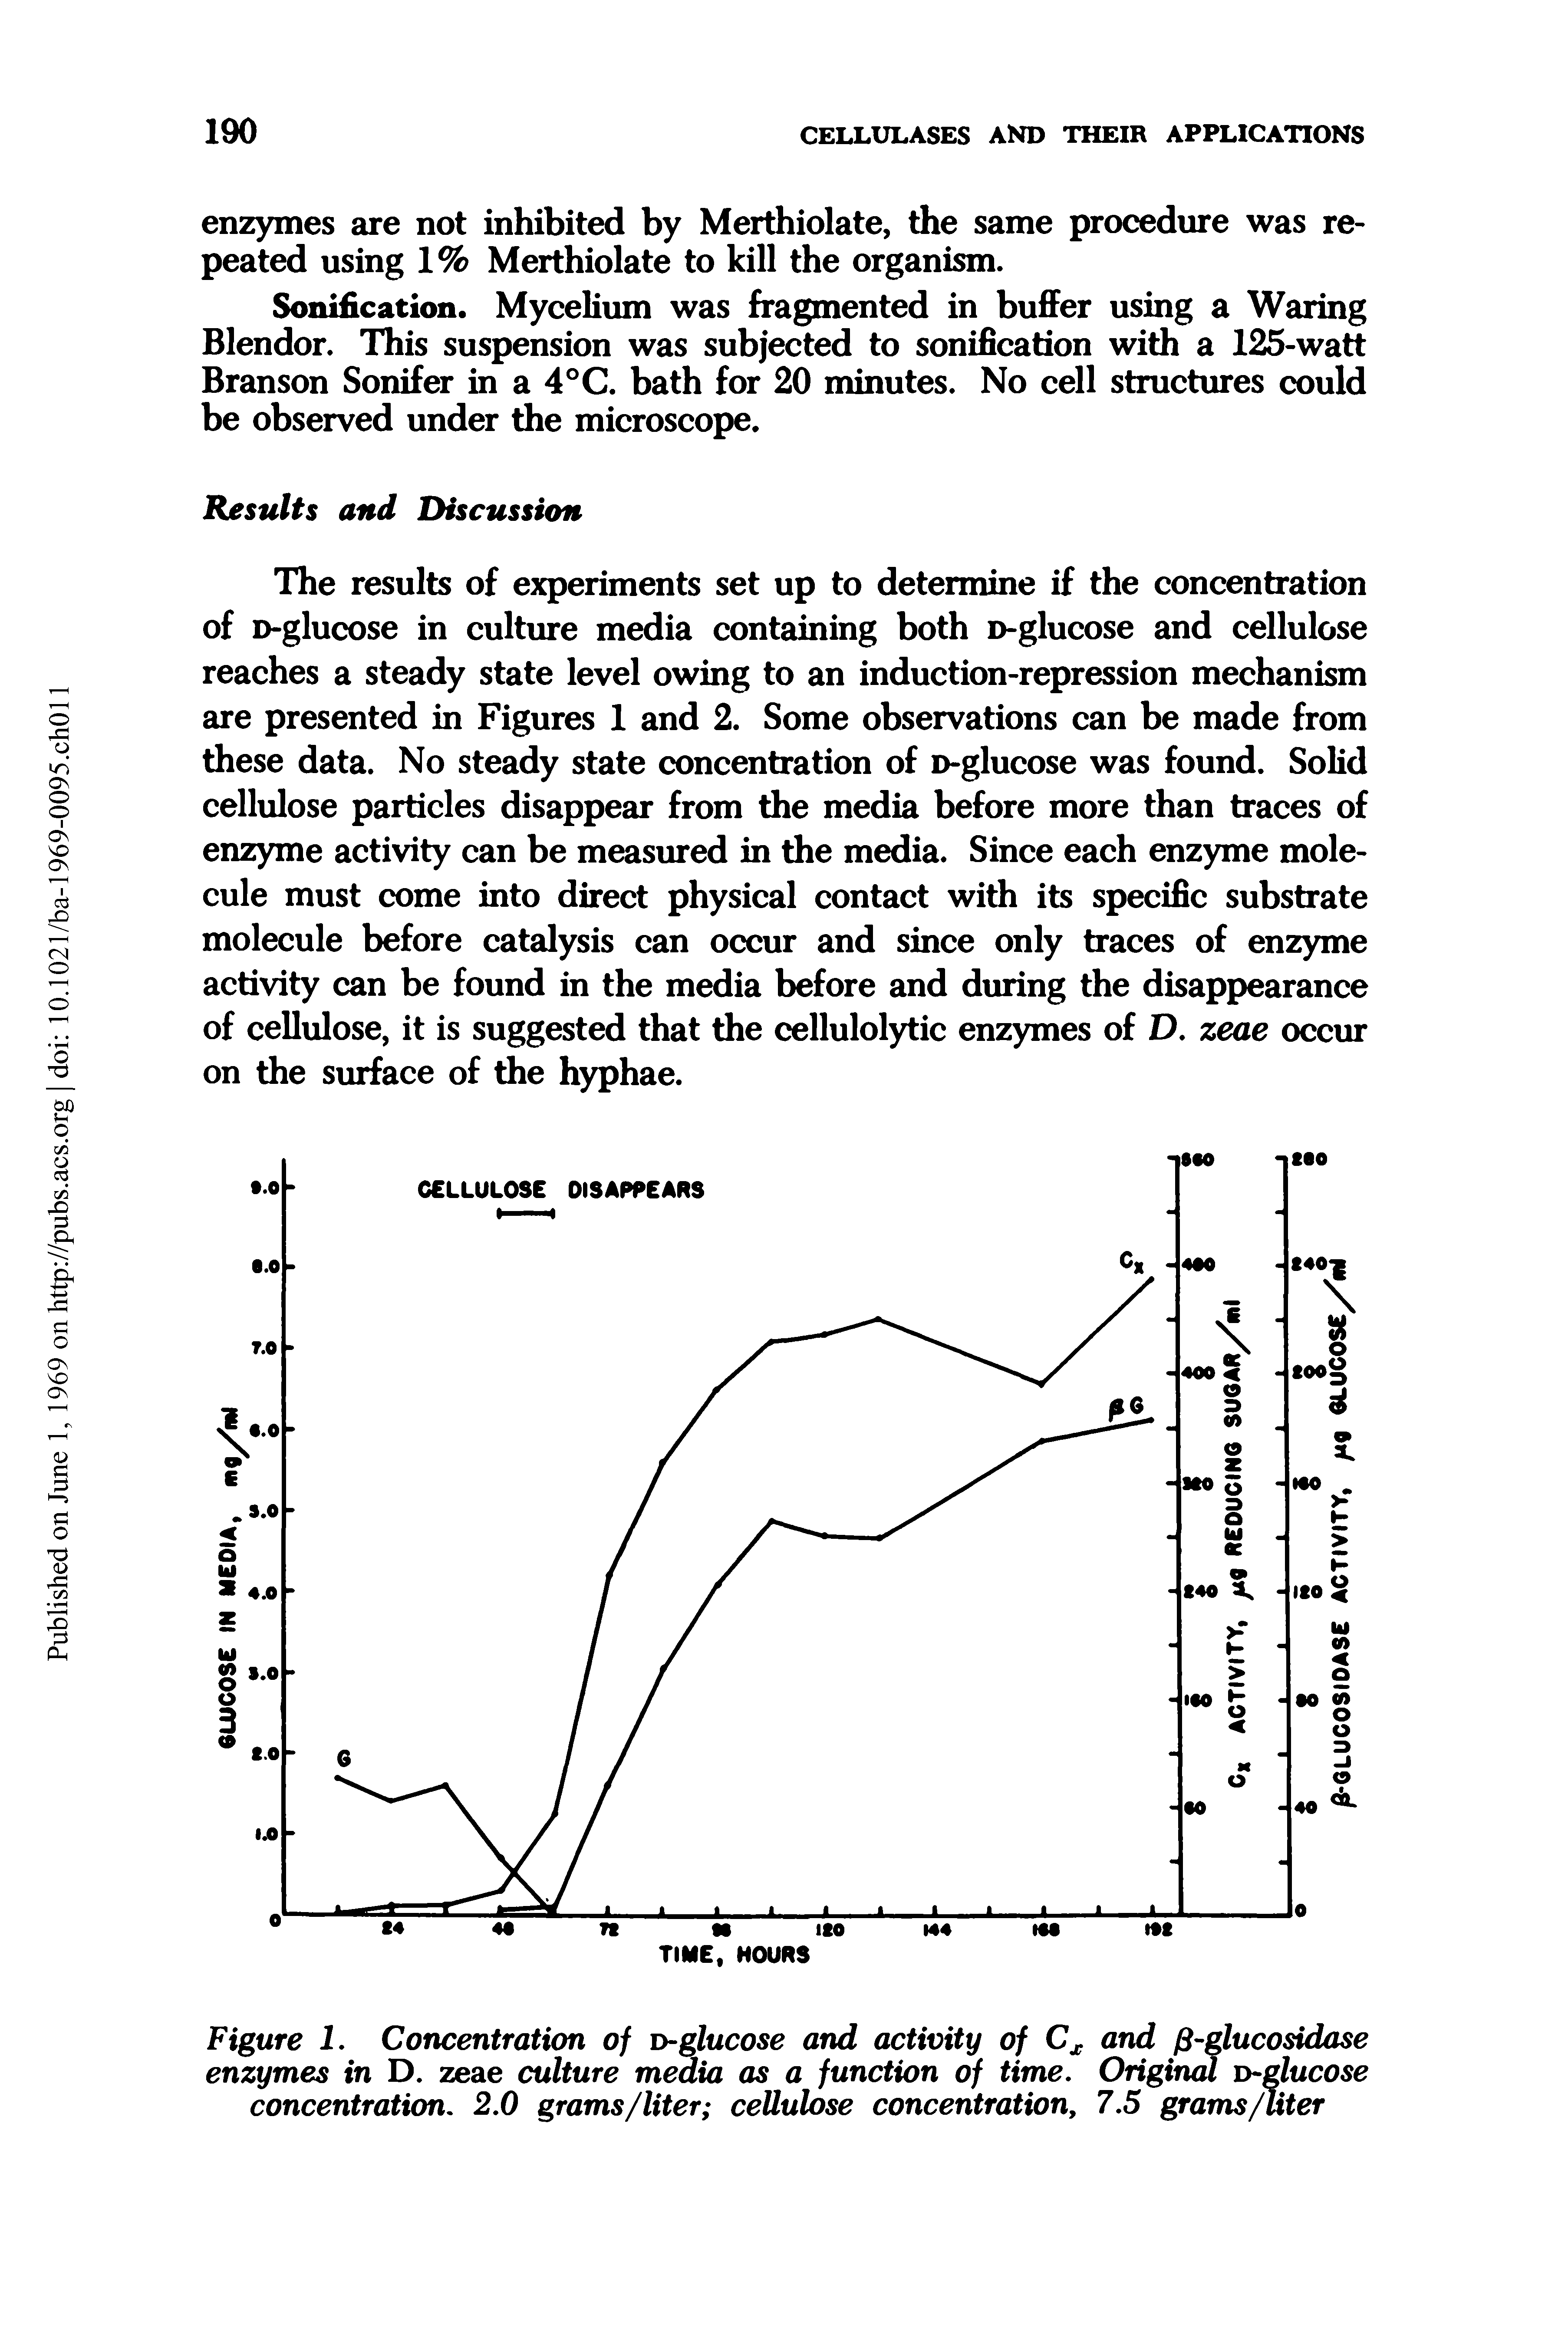 Figure 1. Concentration of D-glucose and activity of Cx and fi-glucosidase enzymes in D. zeae culture media as a function of time. Original D-glucose concentration. 2.0 grams/liter cellulose concentration, 7.5 grams/liter...